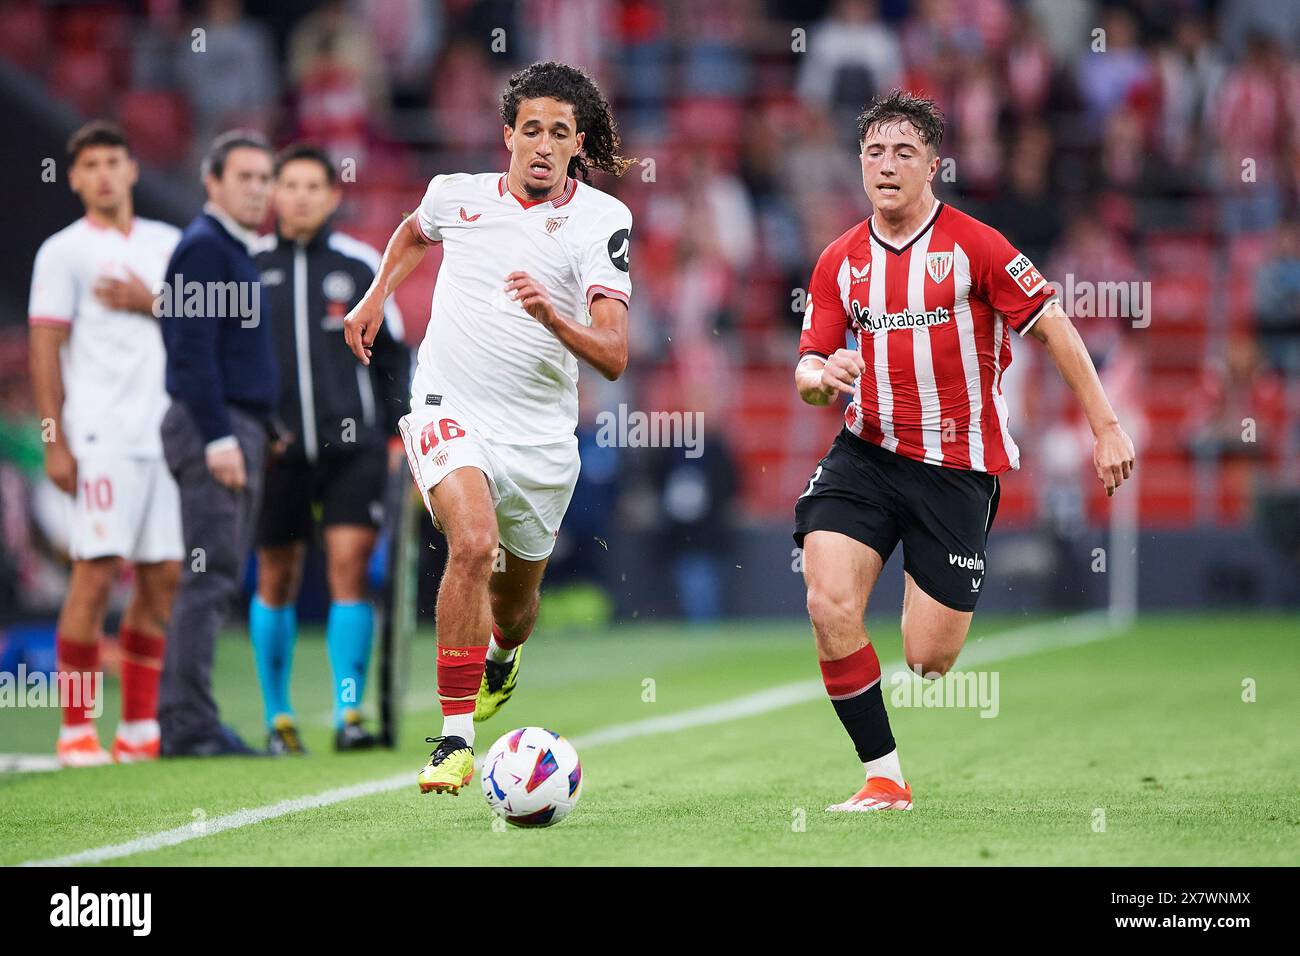 Hannibal Mejbri of Sevilla FC compete for the ball with Mikel Jauregizar of Athletic Club during the LaLiga EA Sports match between Athletic Club and Stock Photo